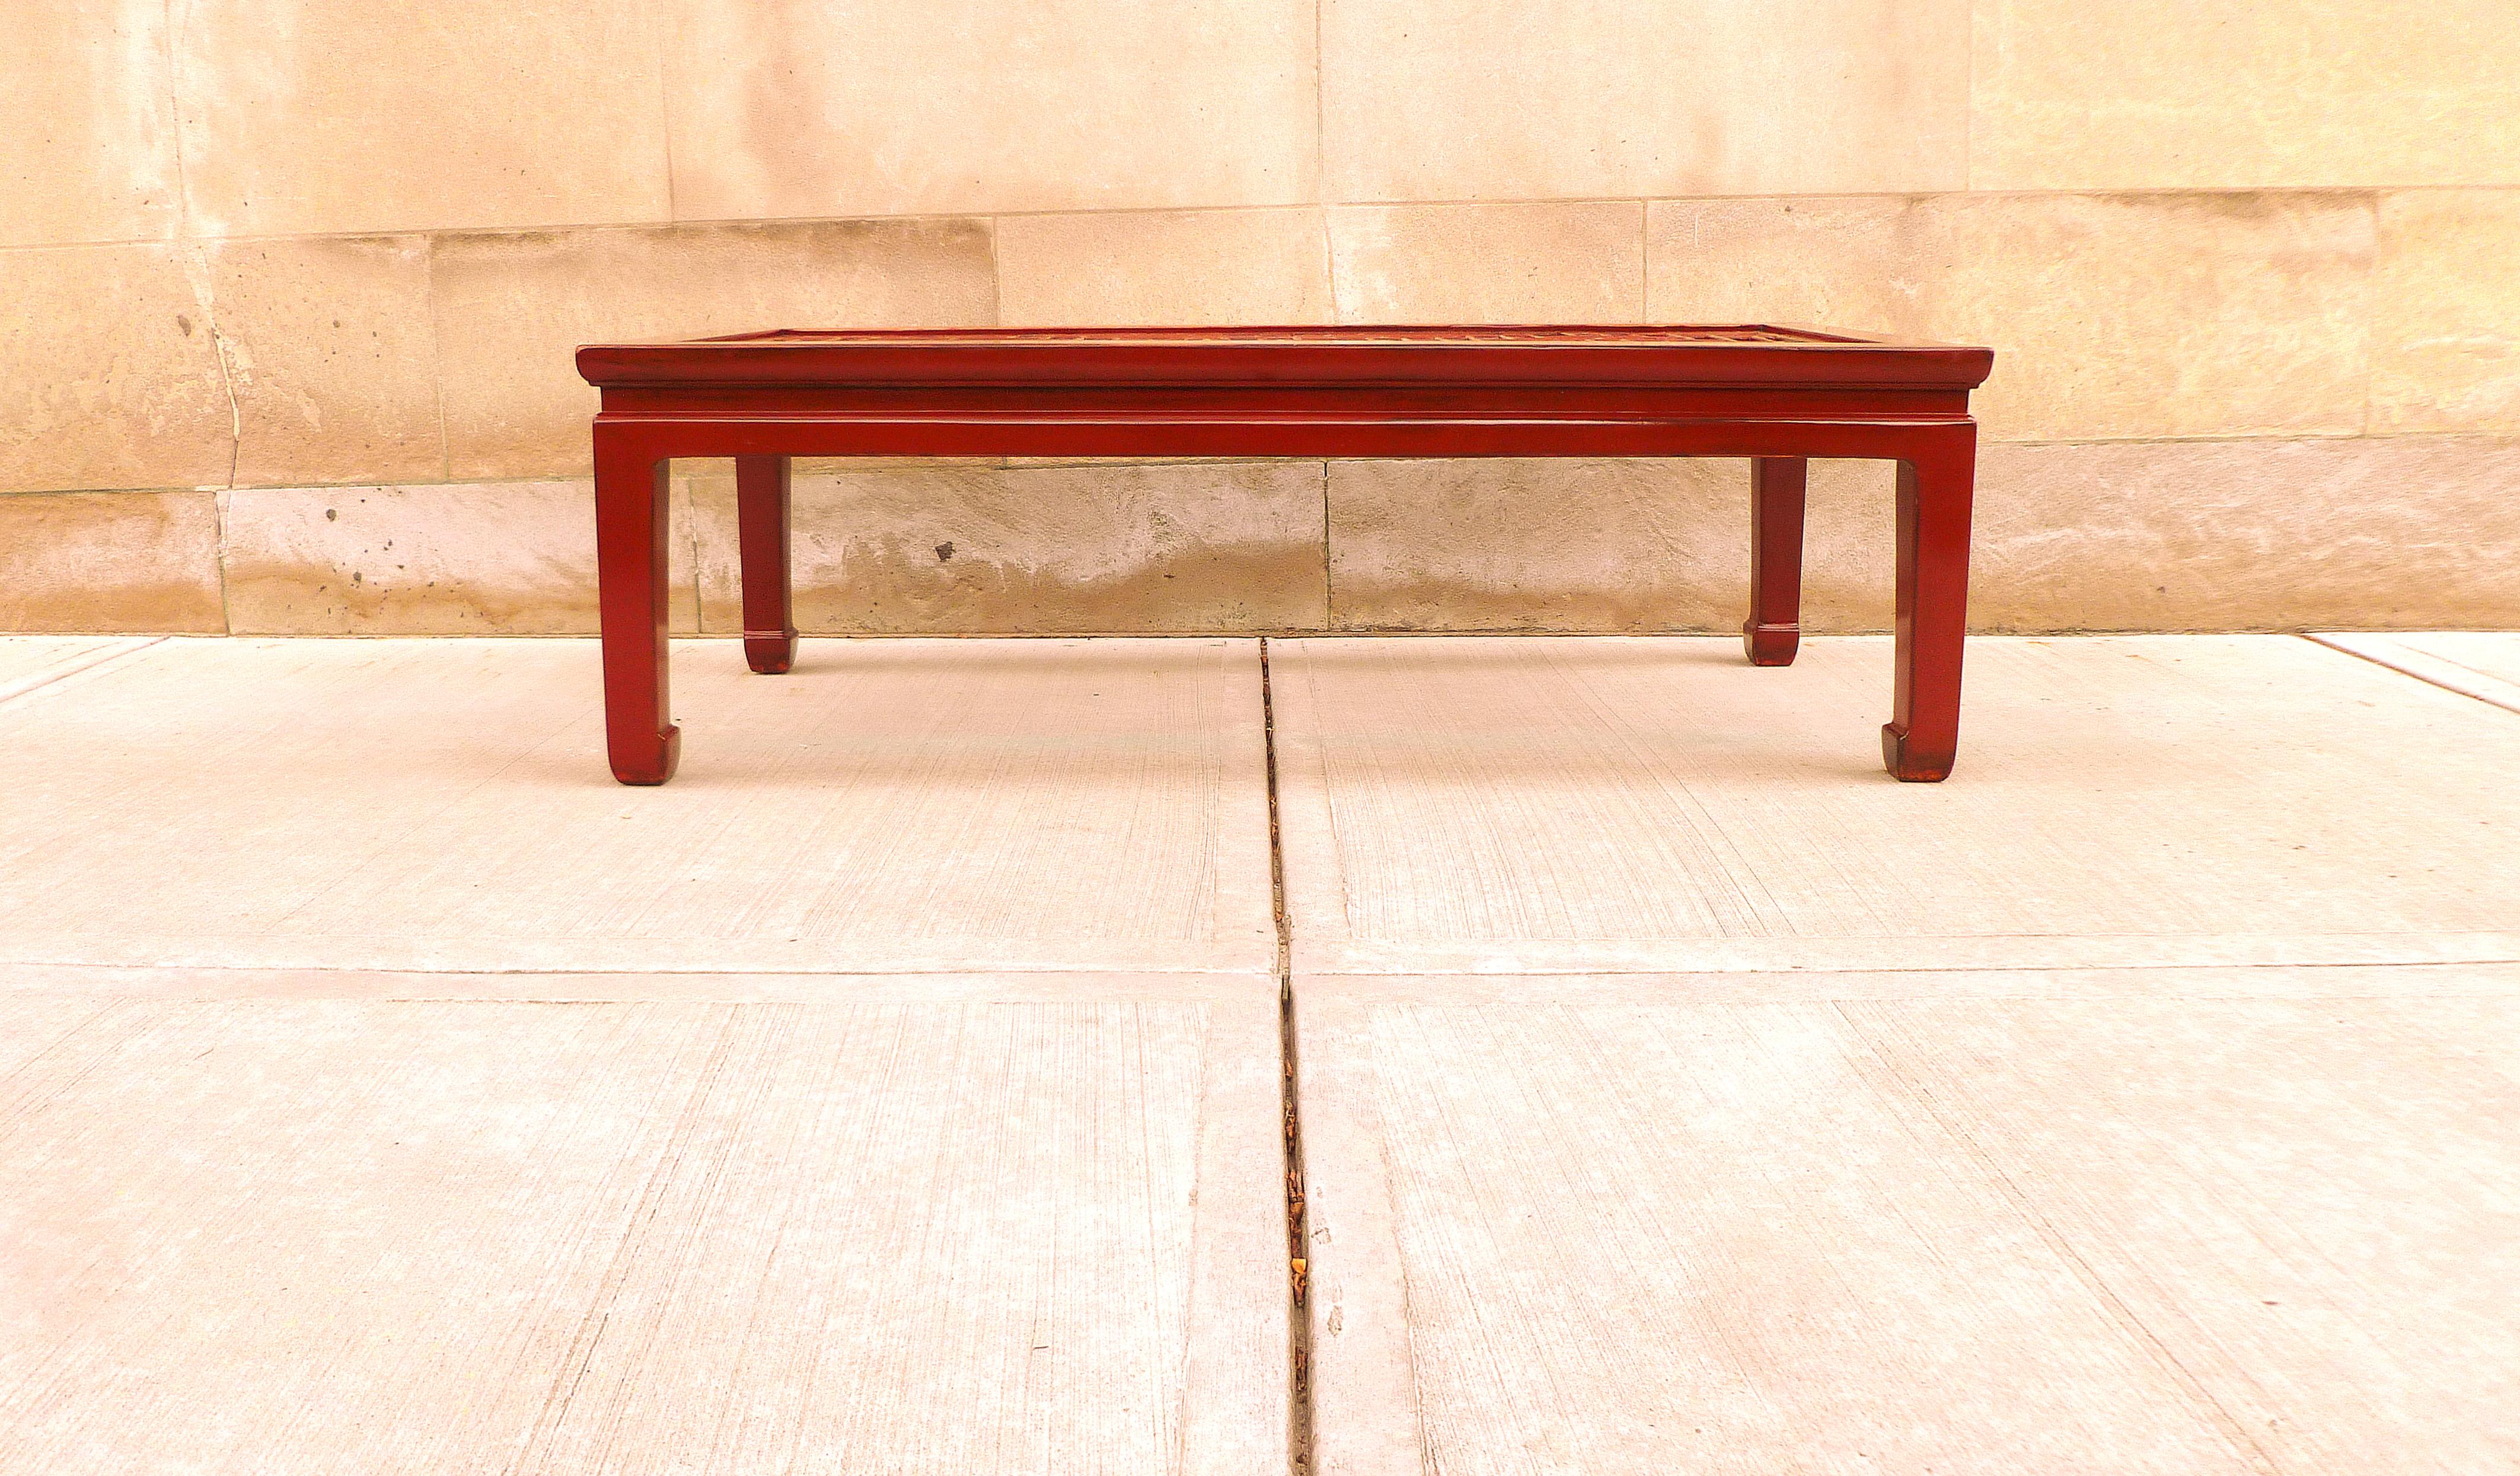 Fine red lacquer low table / coffee table with fret work top, elegant fine red lacquer finished. Purchase red lacquer low table / coffee table also come with glass top that can place on top of fret work area.
We carry fine quality furniture with